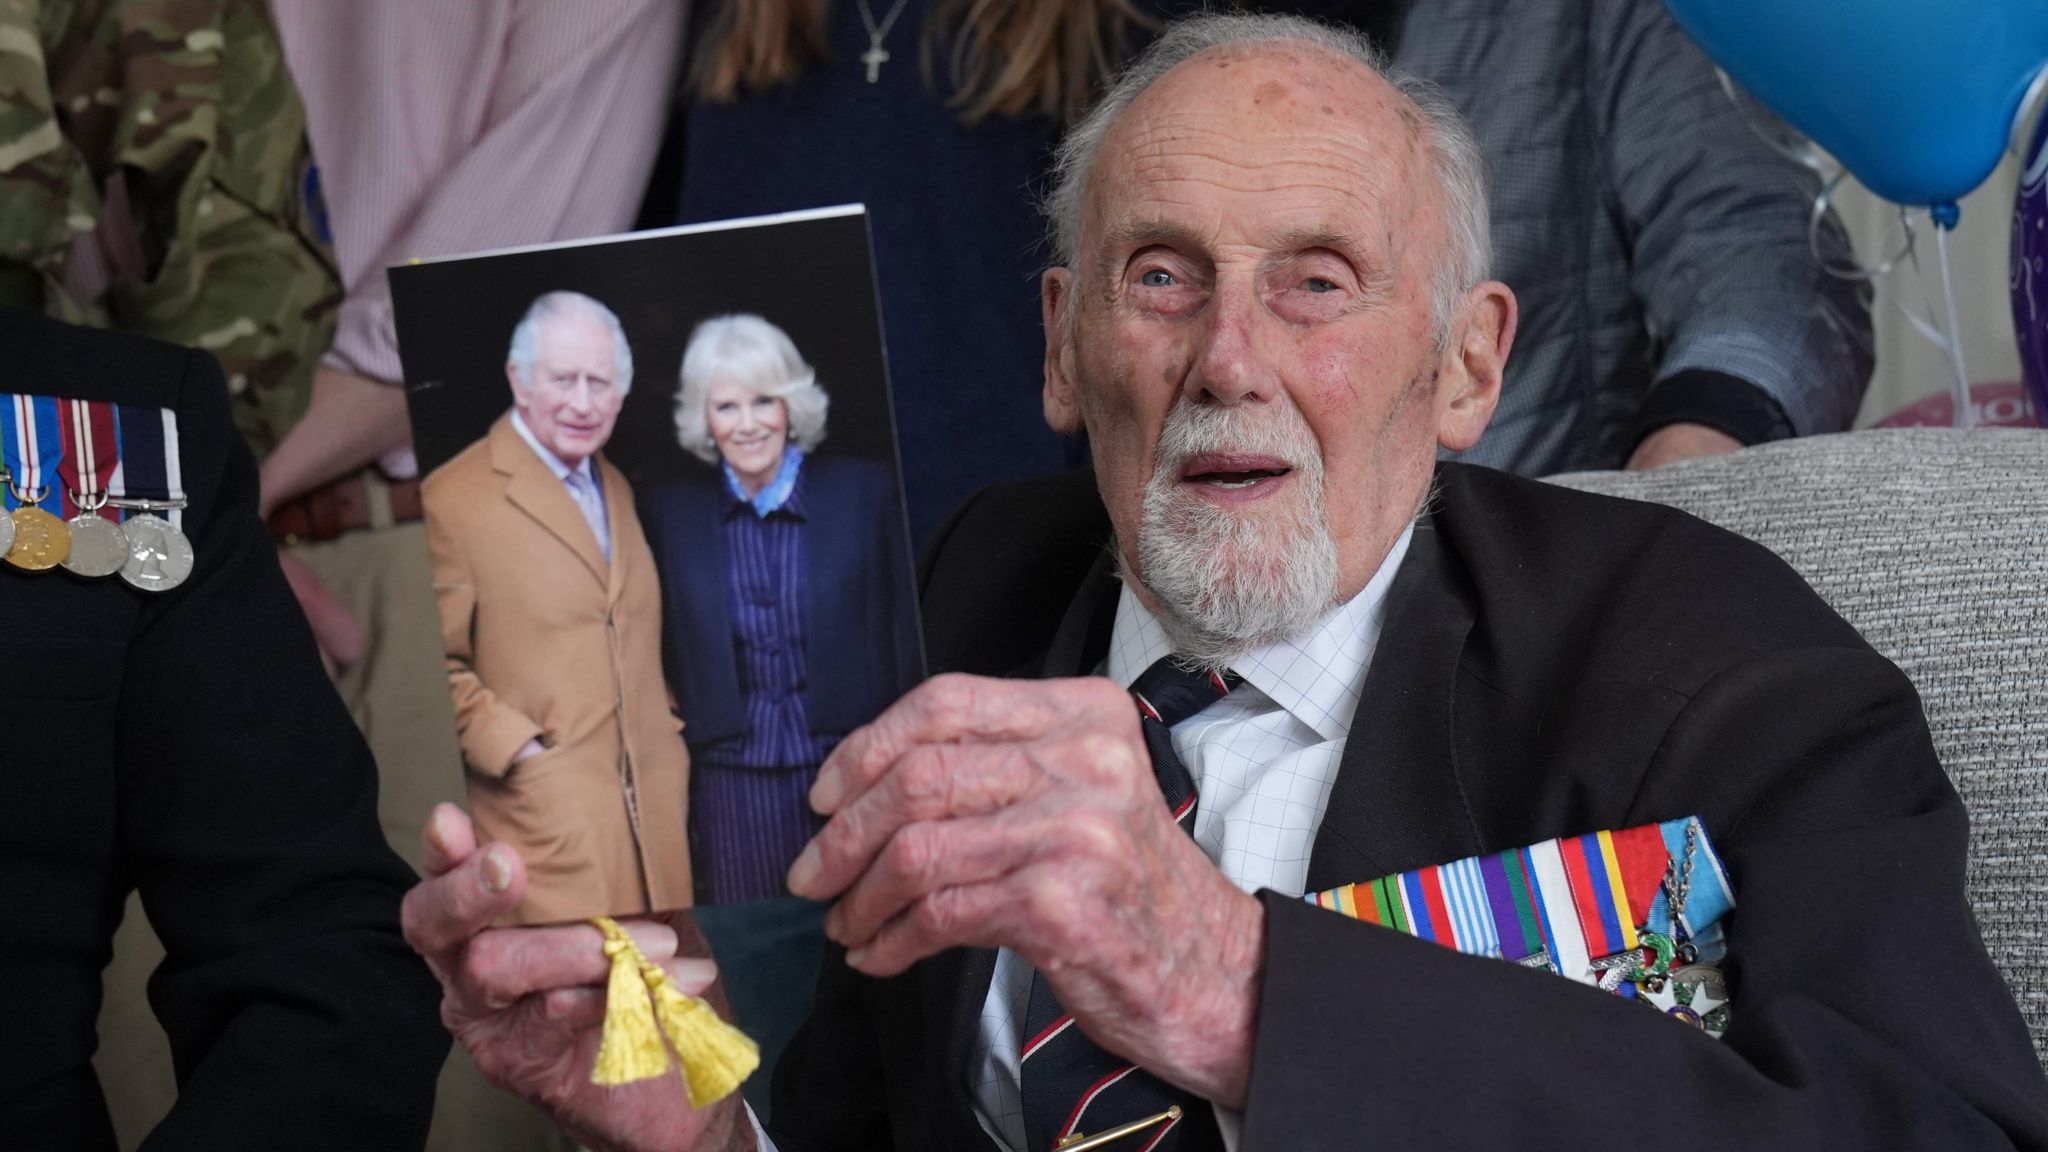 John Roberts in his military uniform holding his card from the king and queen celebrating his 100th birthday